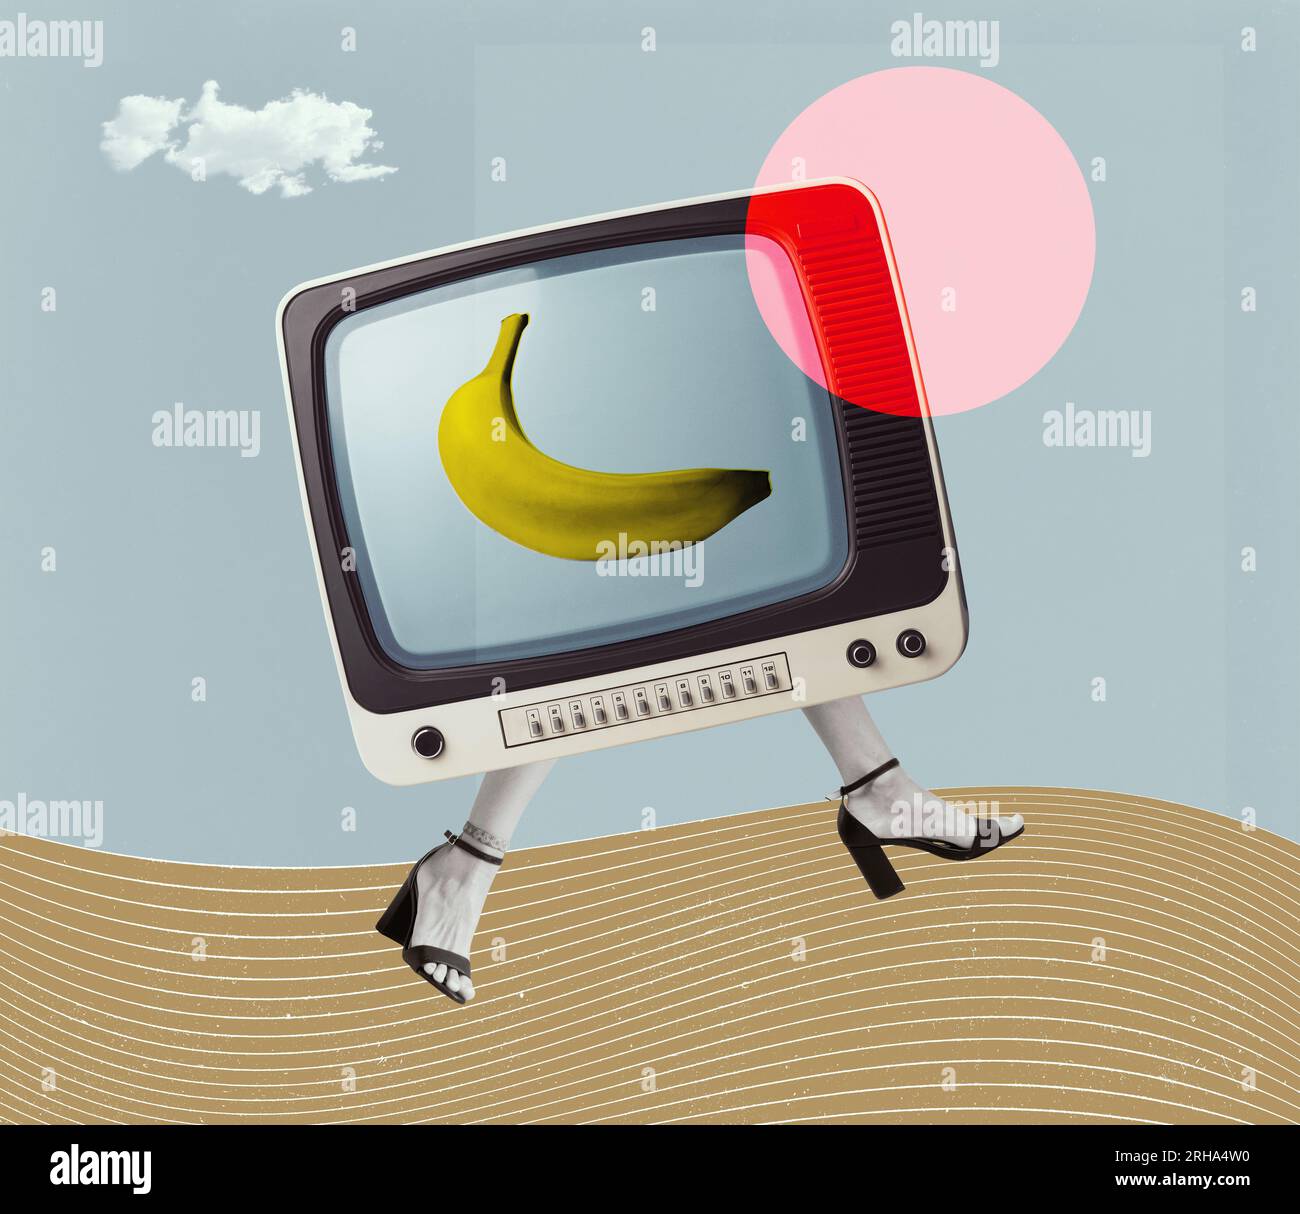 Vintage analog TV walking with human legs and banana on the screen, surrealistic collage poster Stock Photo